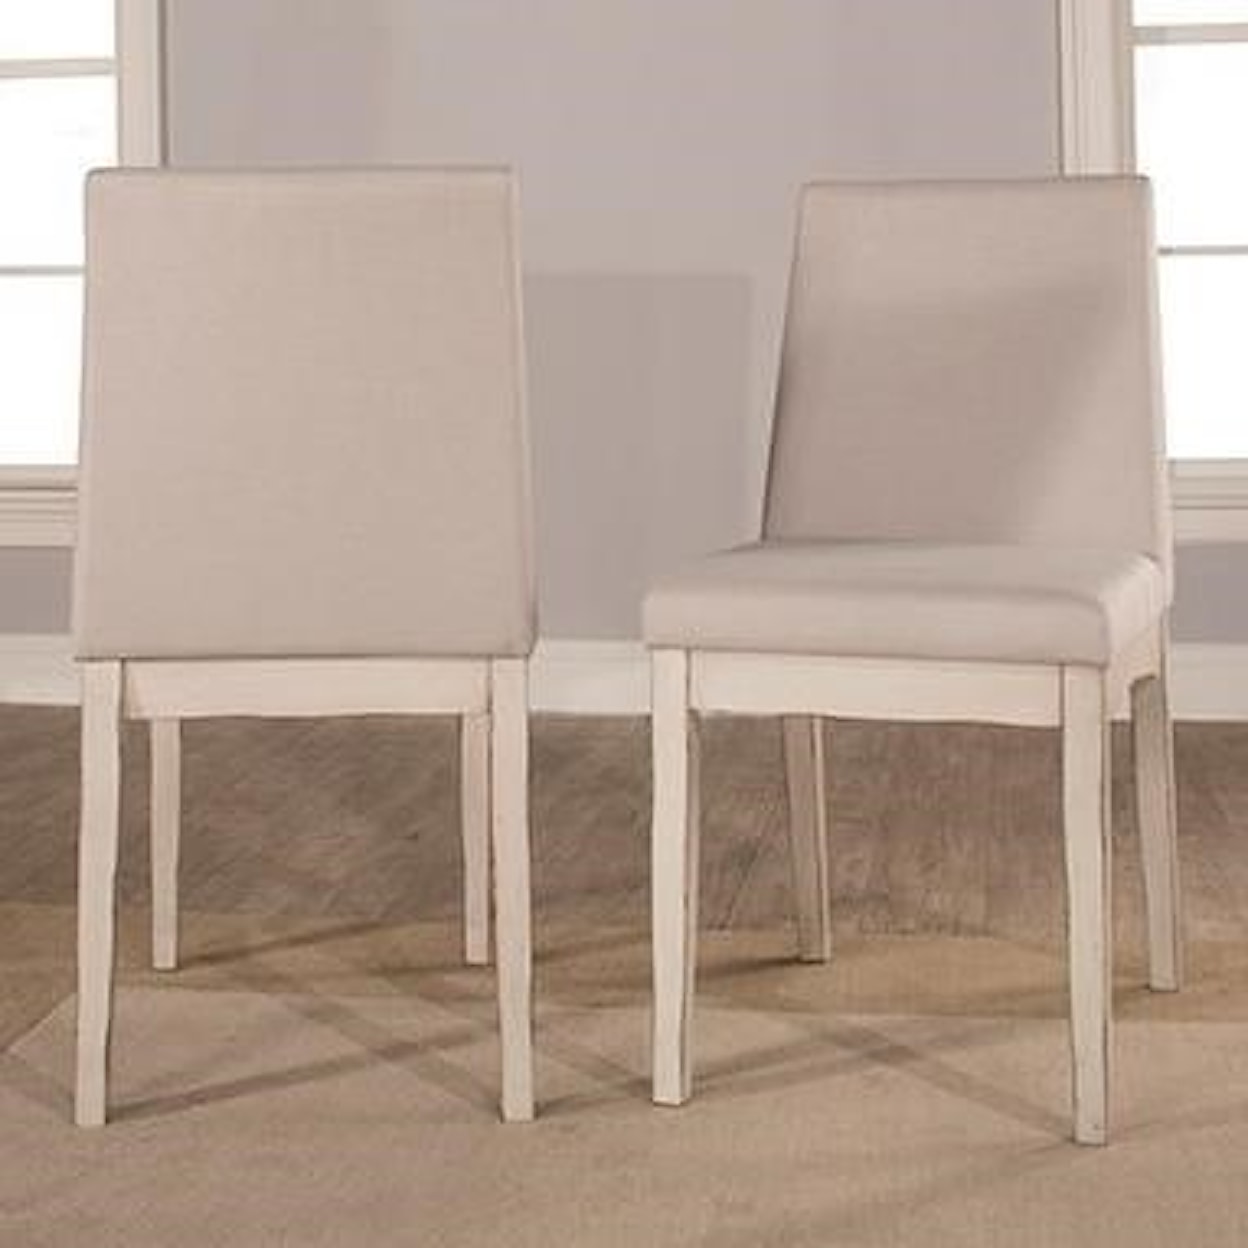 Hillsdale Clarion Upholstered Dining Chair - Set of 2